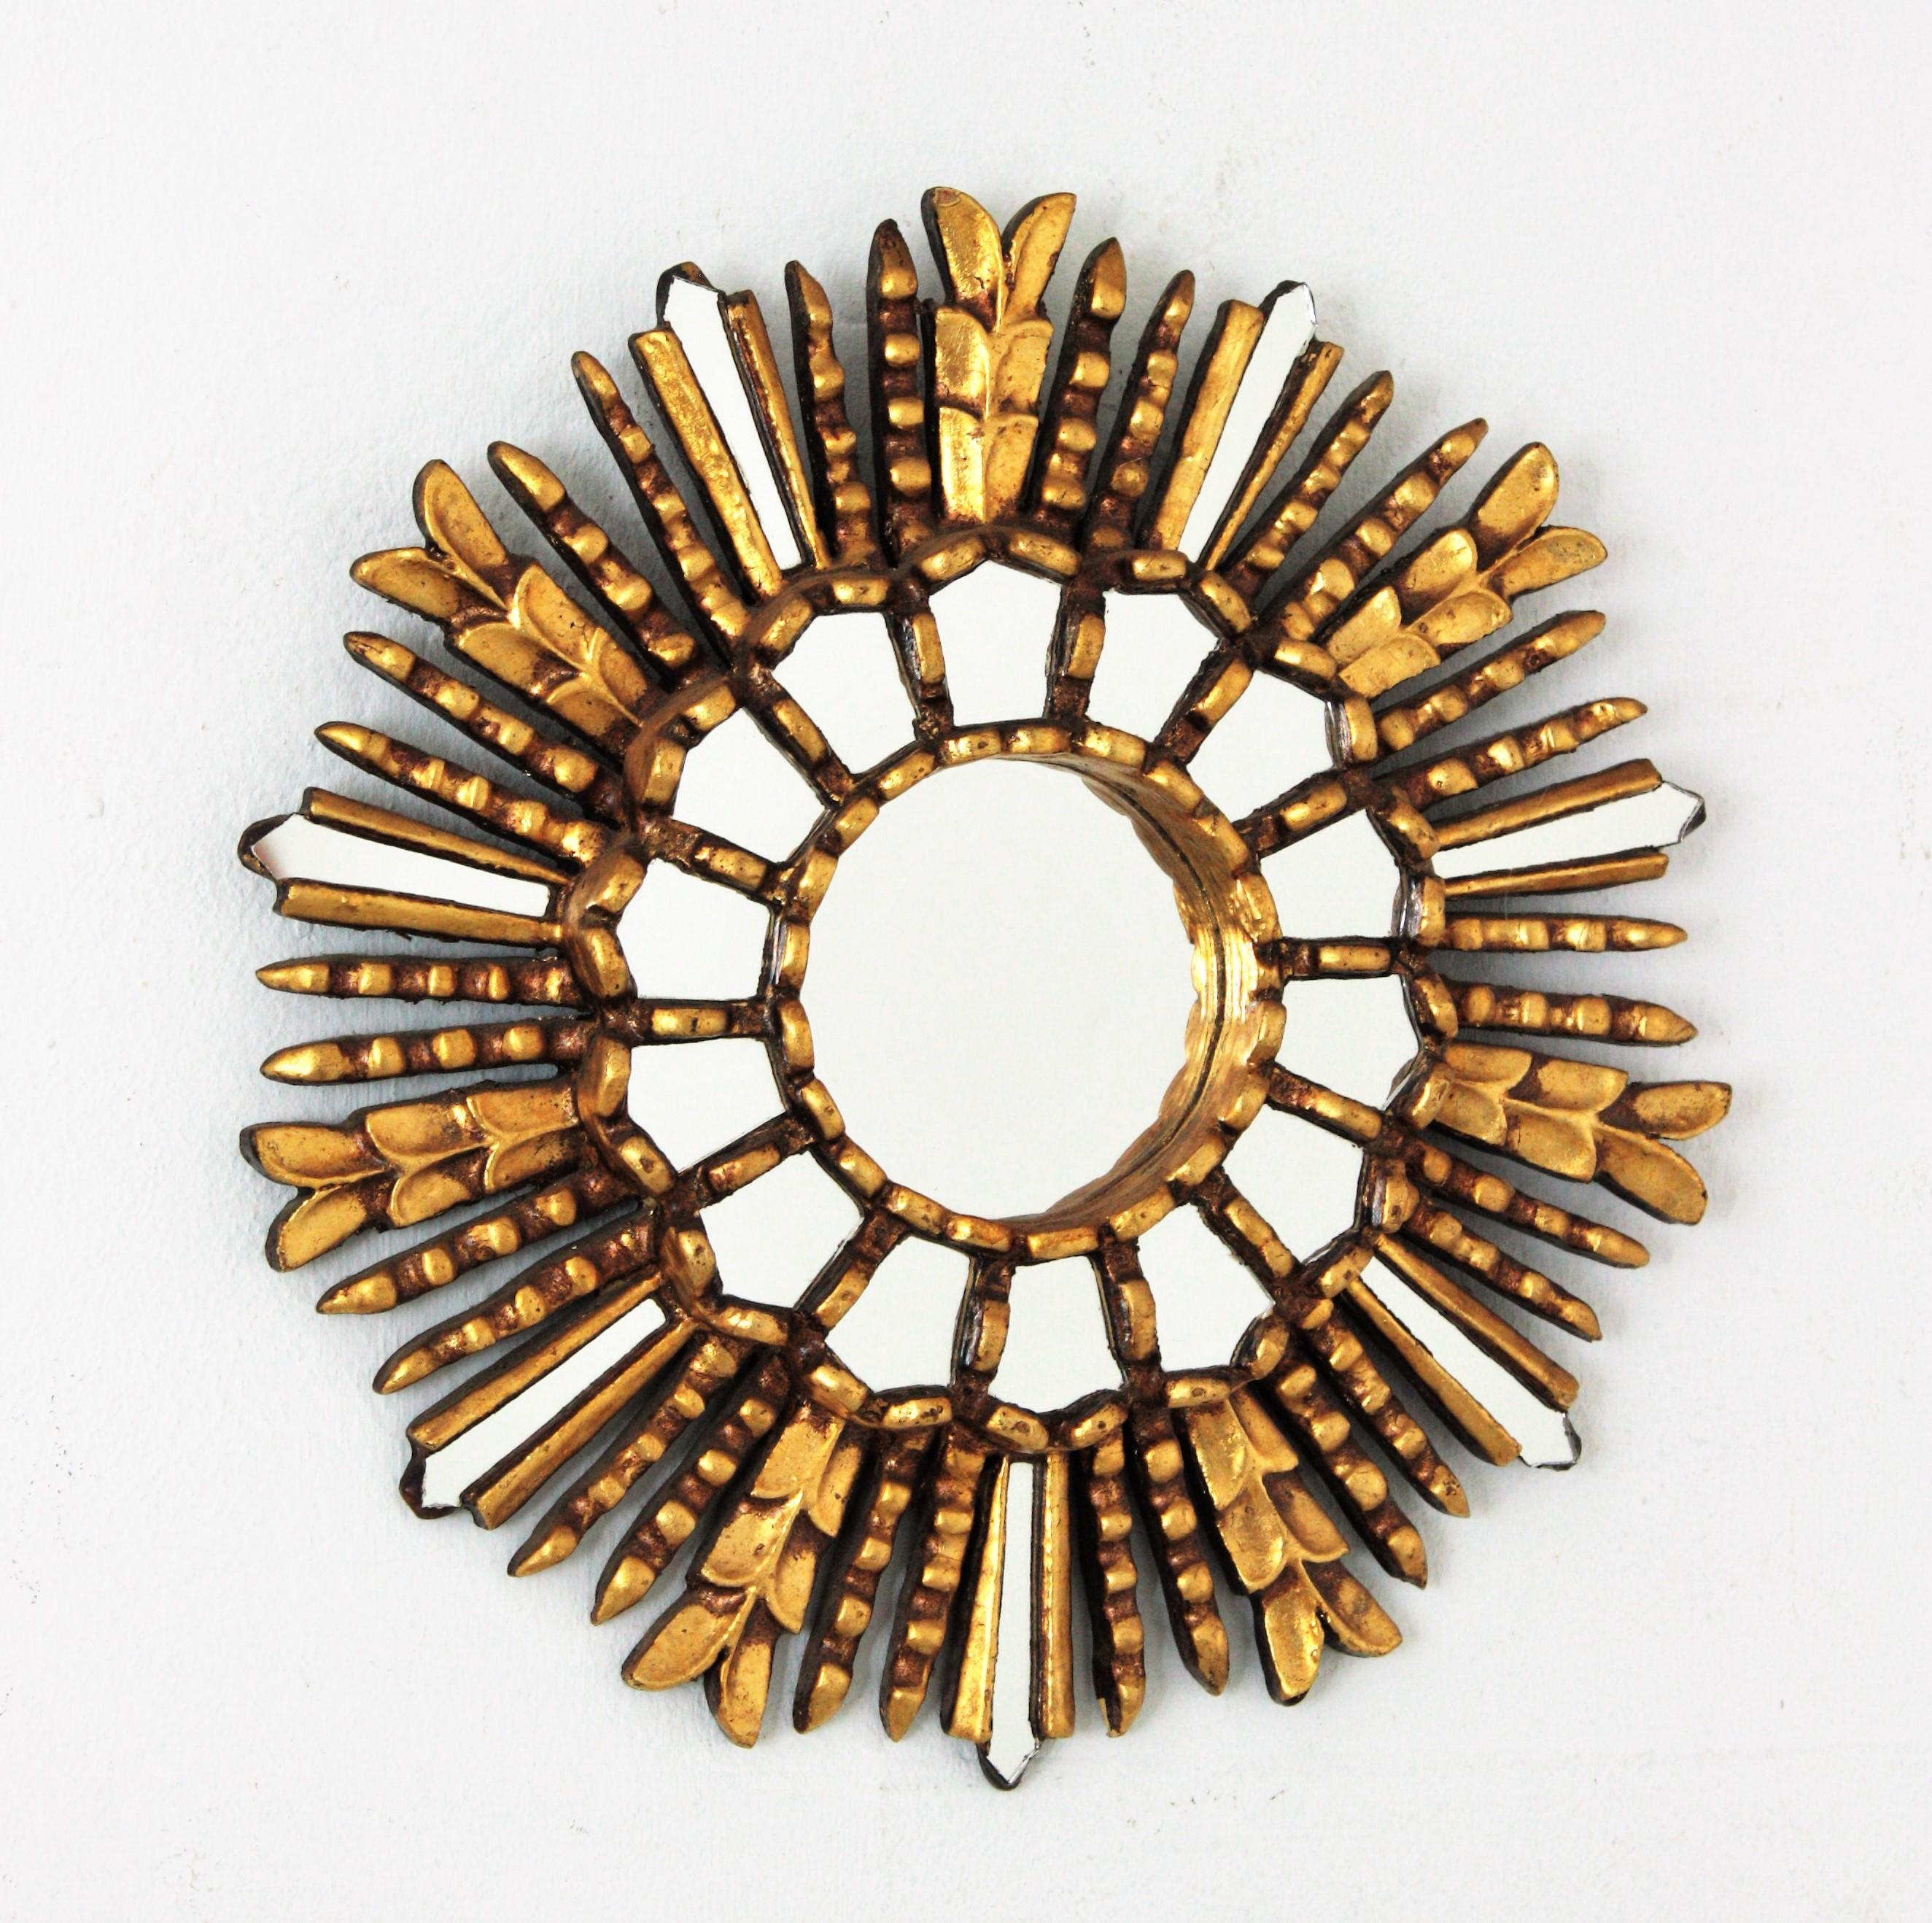 Spanish Colonial style gilt wood sunburst mirror with mirror insets in the frame, 1950S-1960S
This lovely small sunburst mirror has a layer of mosaic small mirrors surrounding the central glass and alternating rays with mirror inlays in sunburst